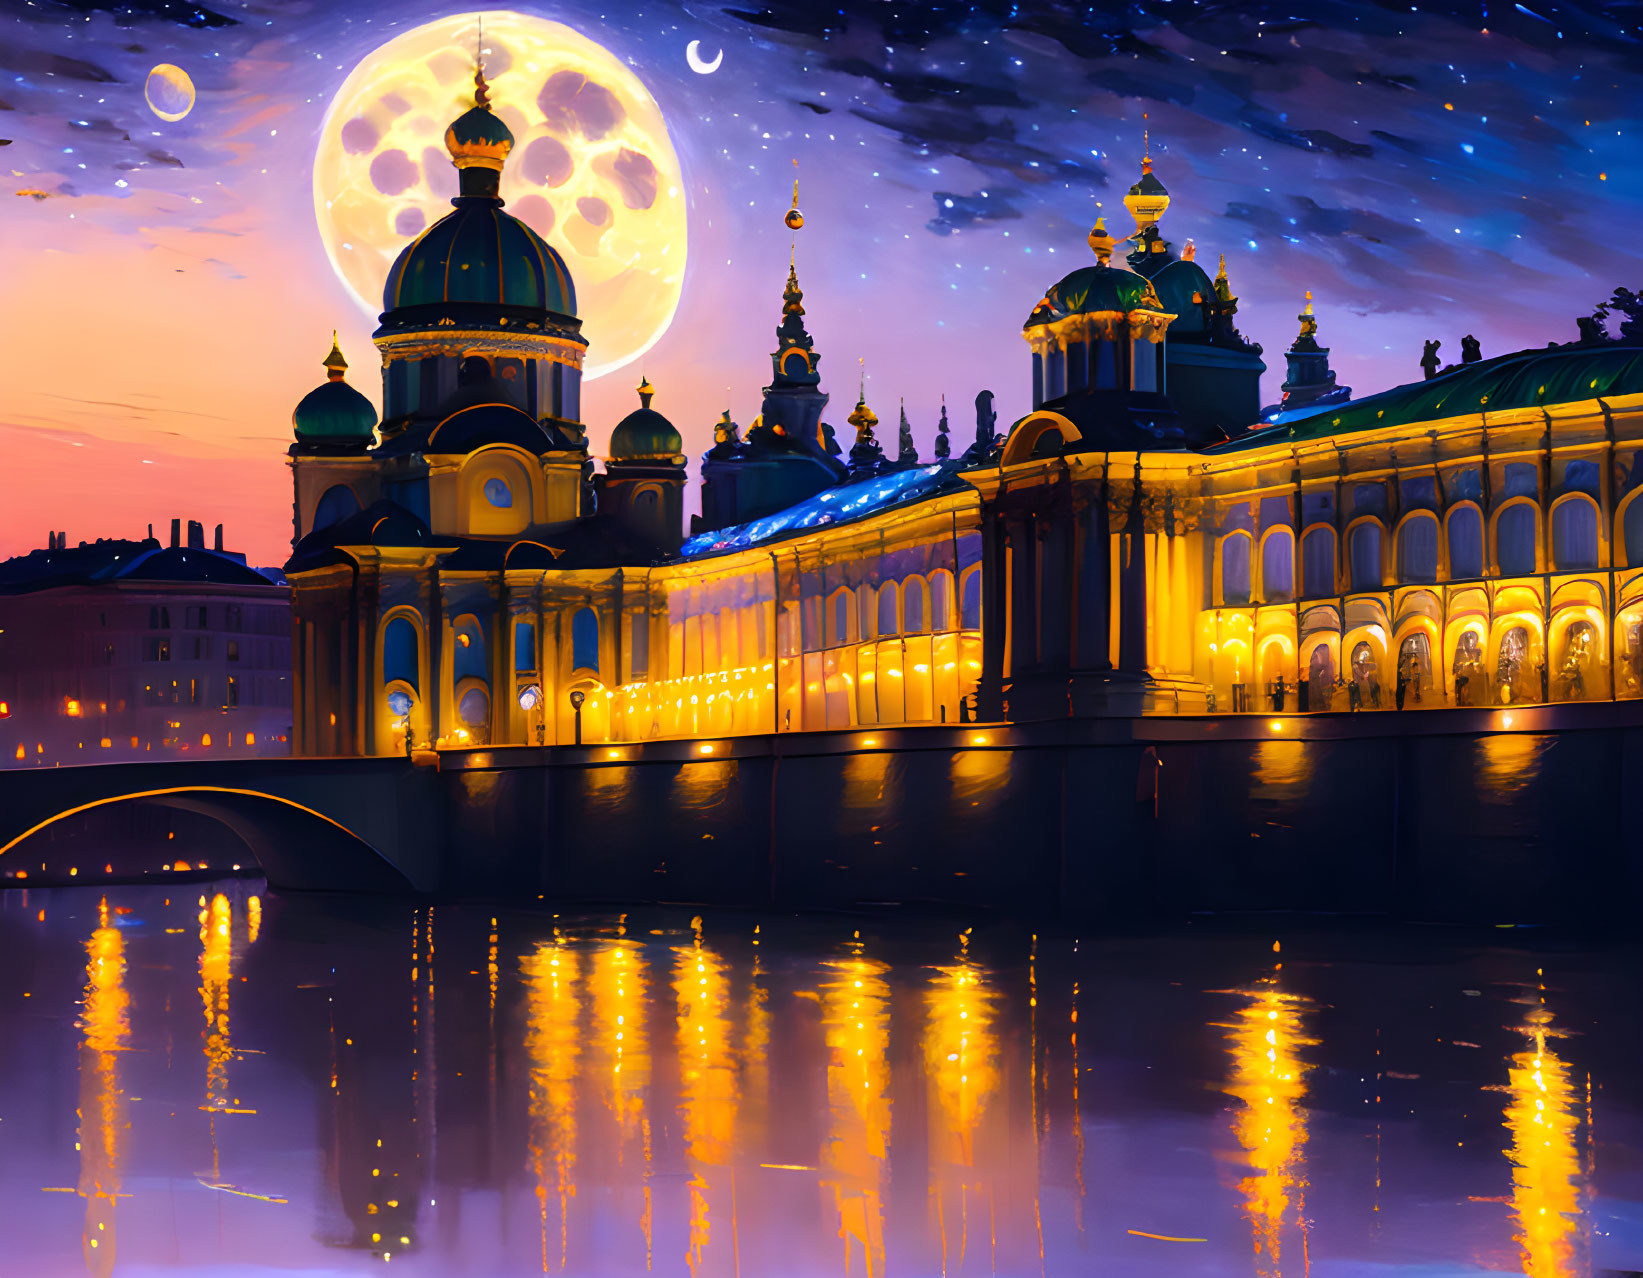 Baroque-style palace with domes under night sky reflected in river